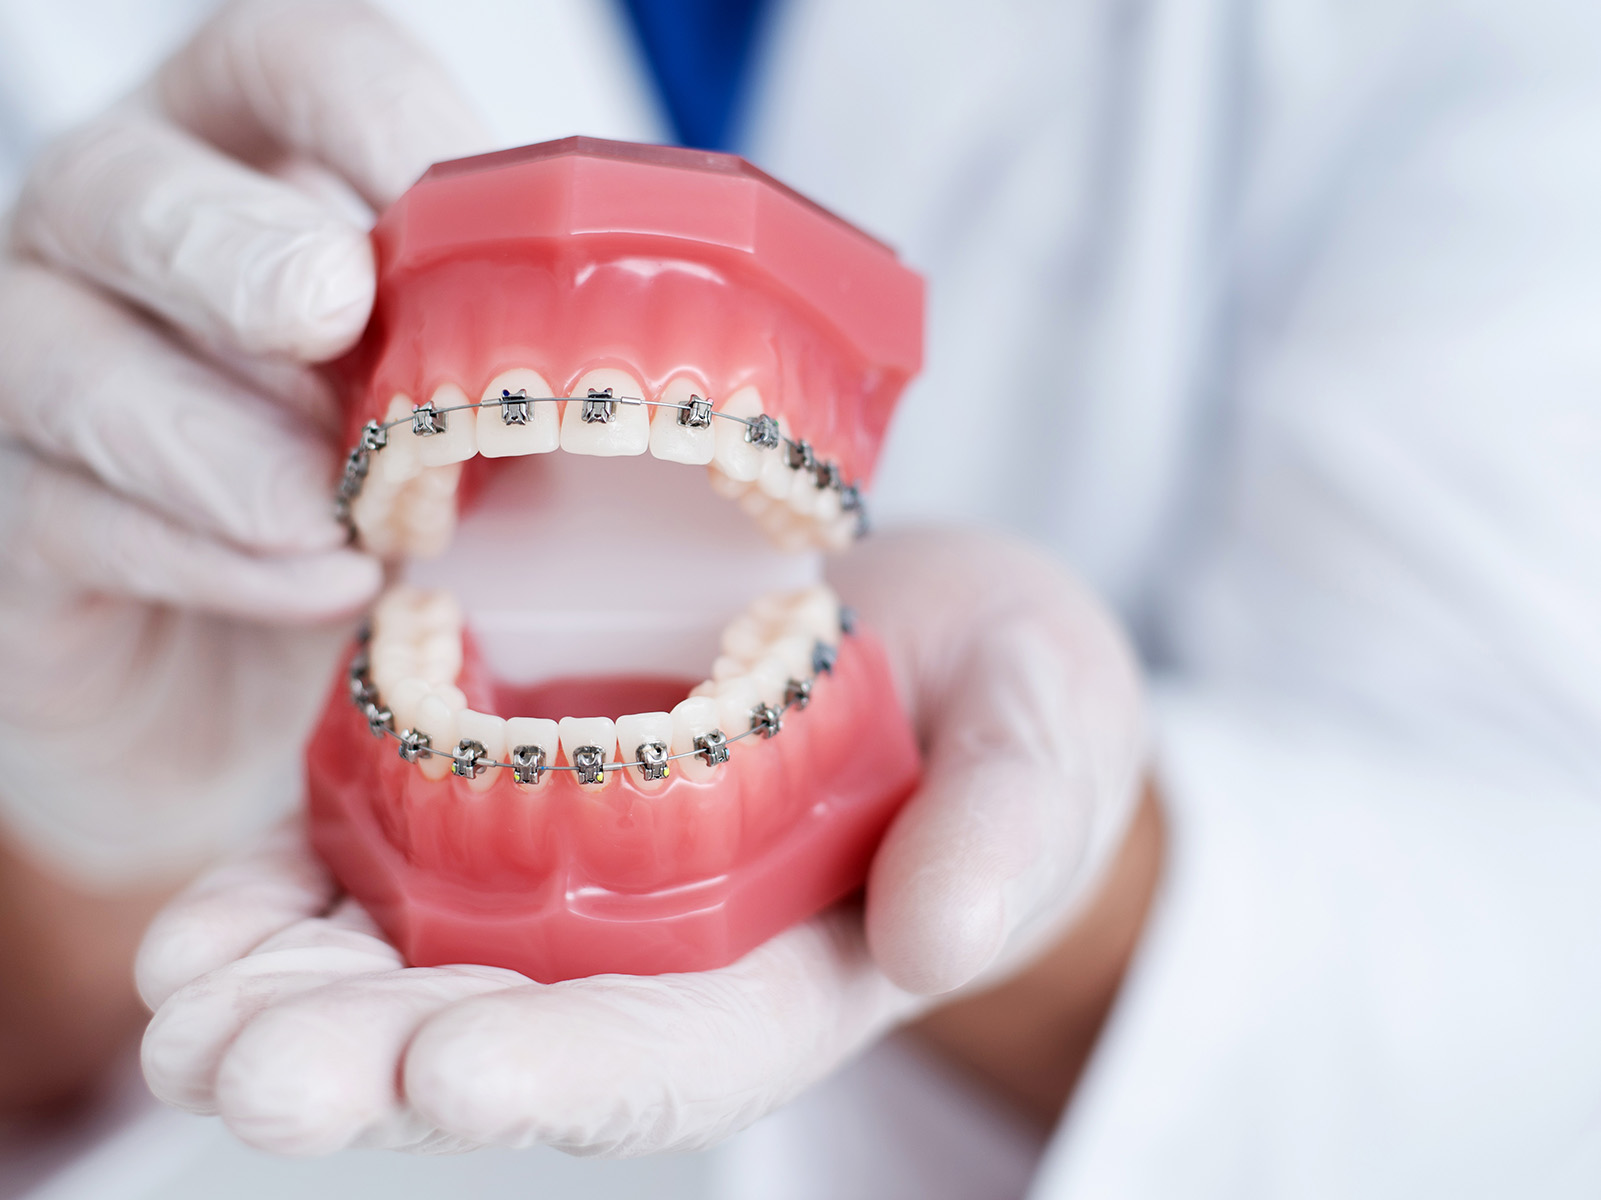 What are damon braces and how are they different from regular braces?